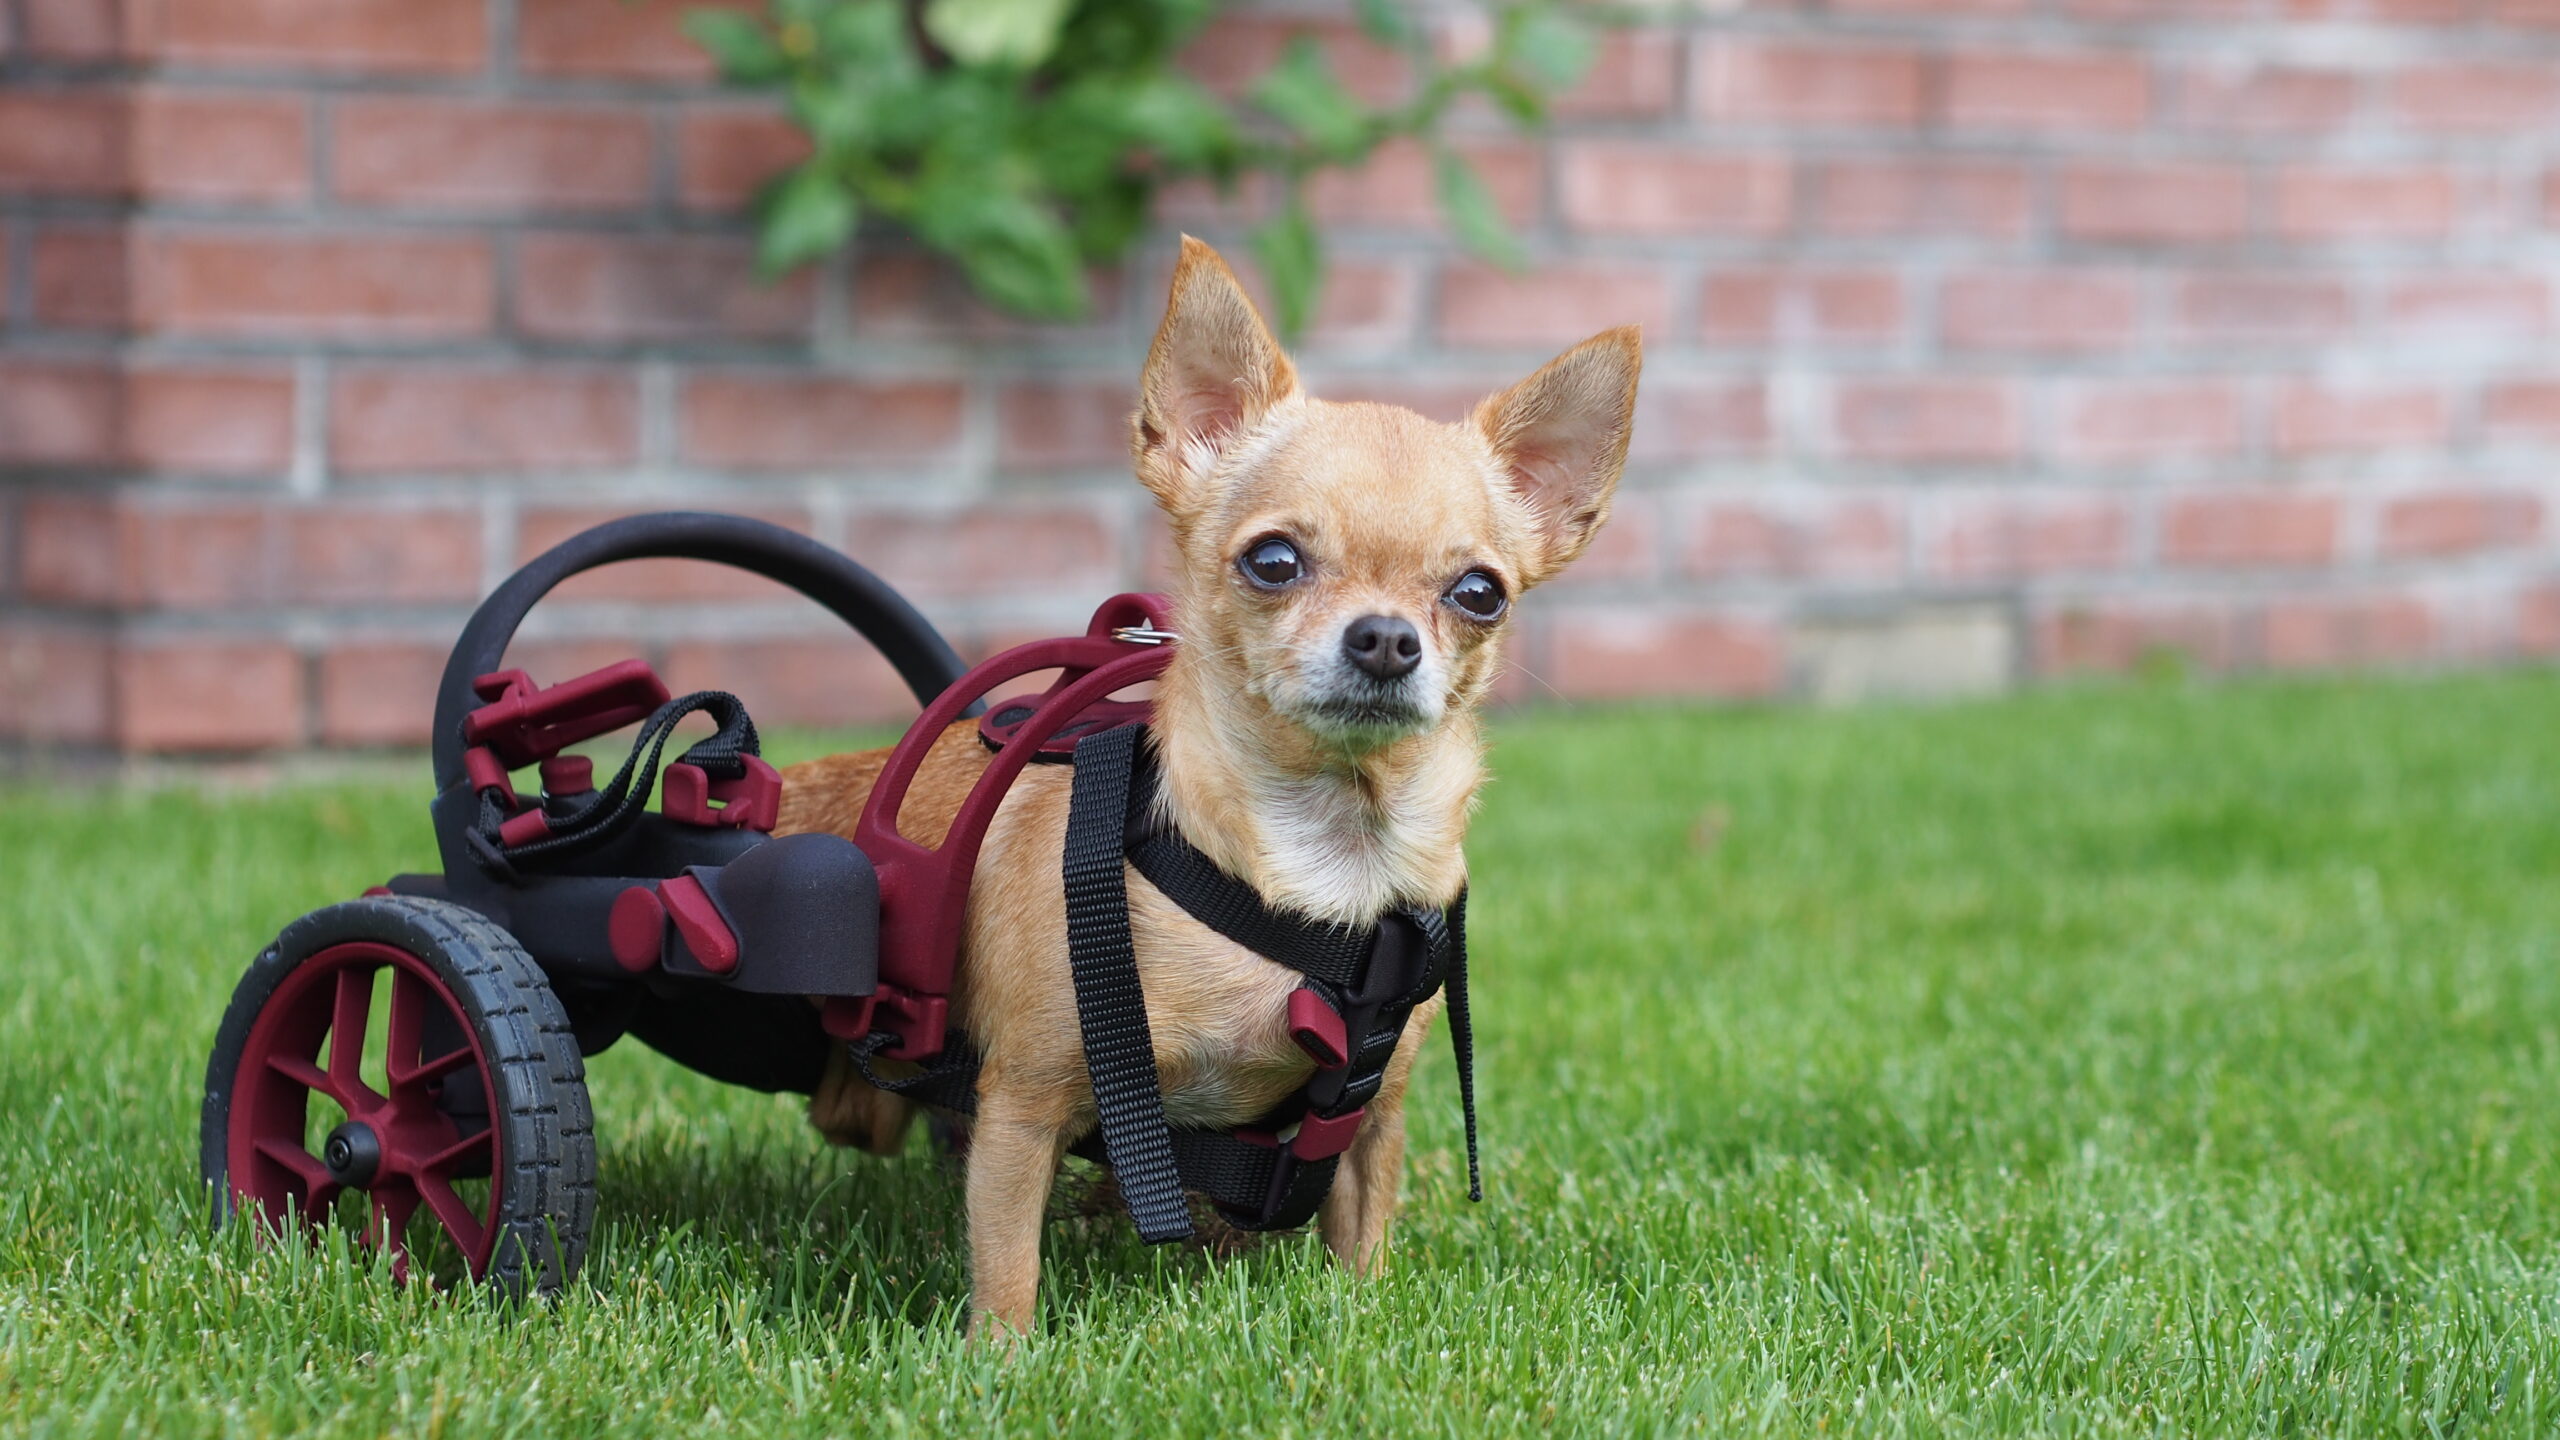 Wheelchair for very small dog - Chihuahua Zoe - AnyoneGo